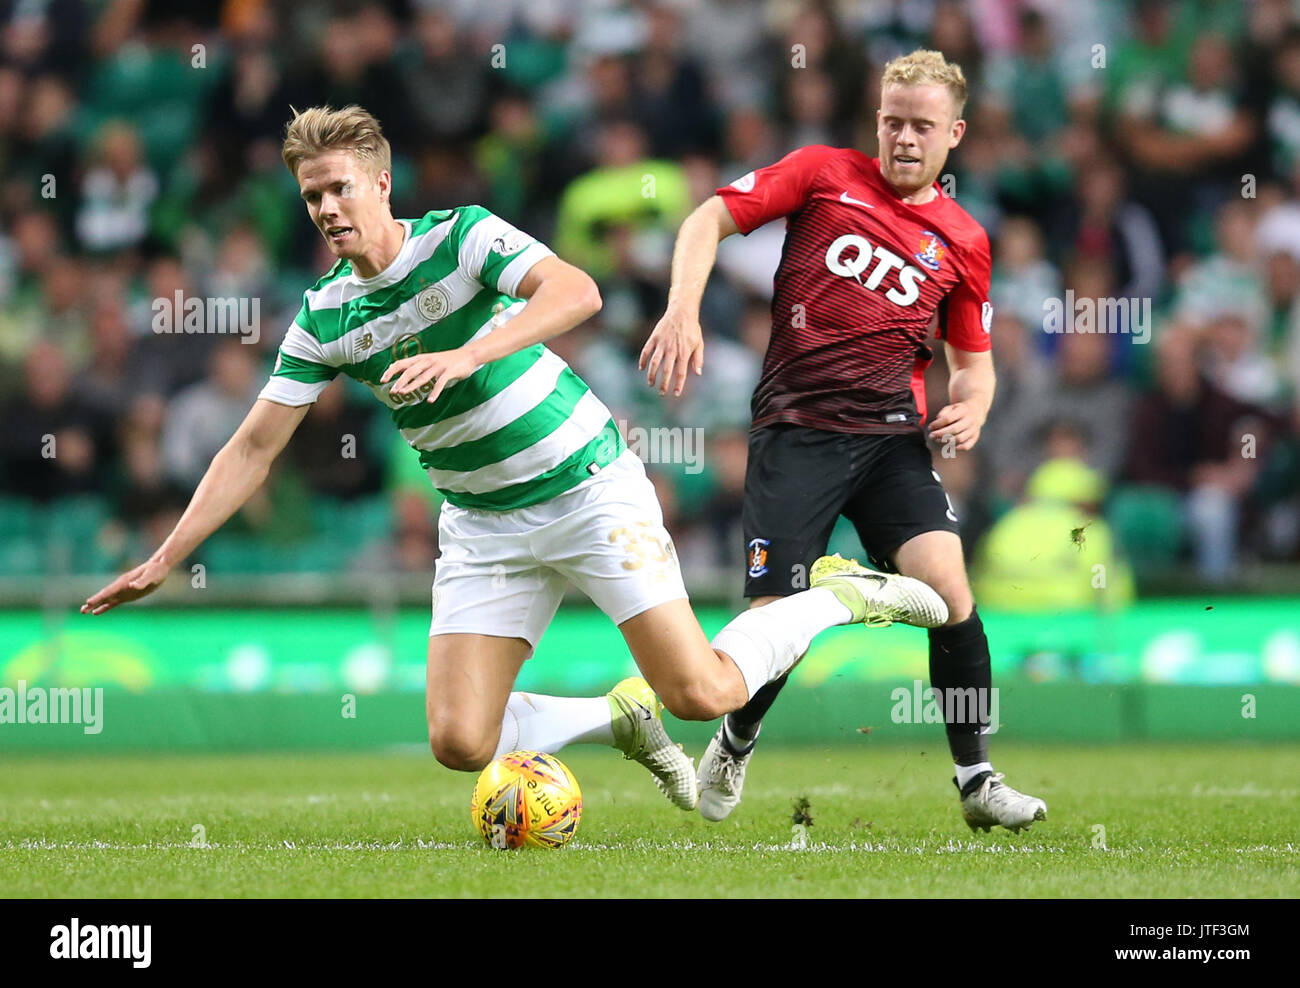 Celtic's Kristoffer Ajer  Rory McKenzie and Kilmarnock's battle for the ball during the Betfred Cup, Second Round match at Celtic Park, Glasgow. PRESS ASSOCIATION Photo. Picture date: Tuesday August 8, 2017. See PA story SOCCER Celtic. Photo credit should read: Jane Barlow/PA Wire. Stock Photo